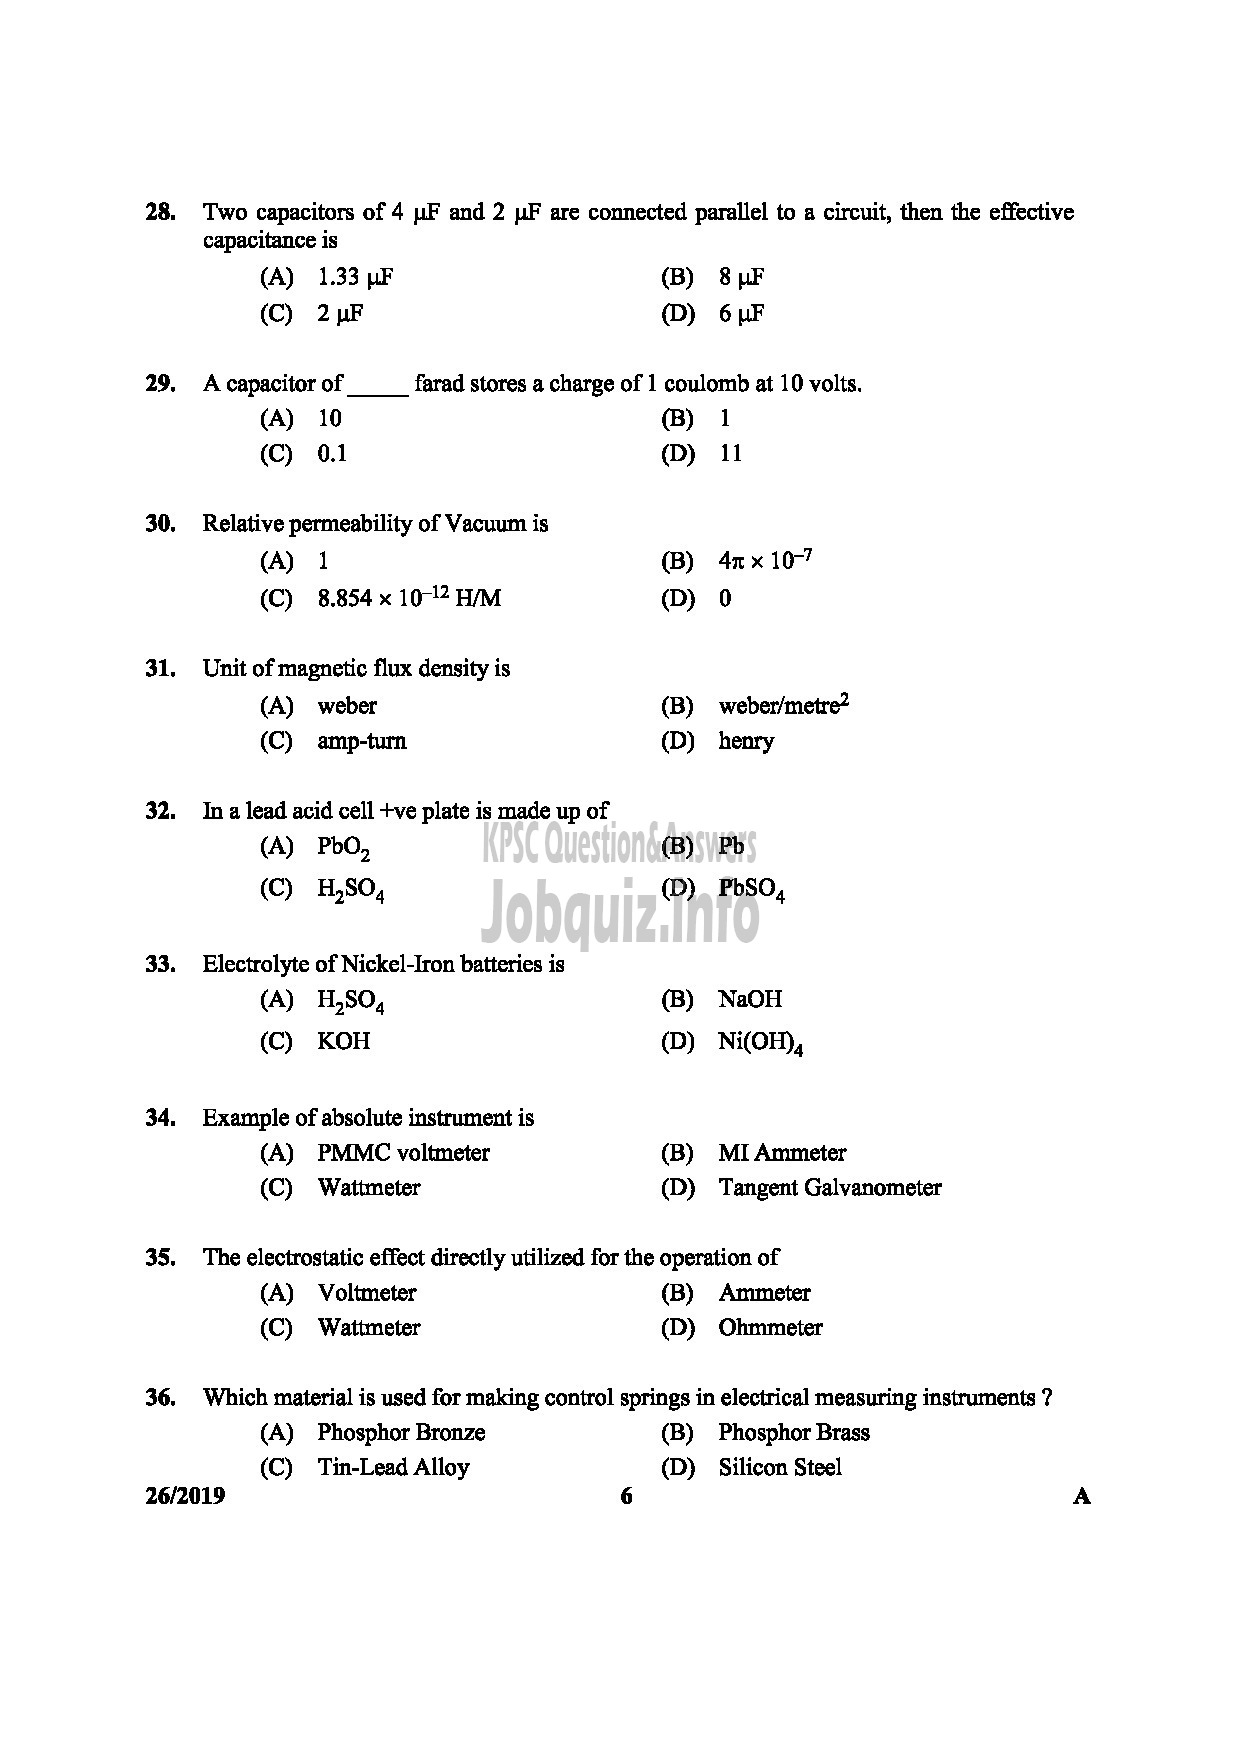 Kerala PSC Question Paper -  Furnce Operator Kerala Municipal Common Service / Electrician Health Services / Lineman PWD -6